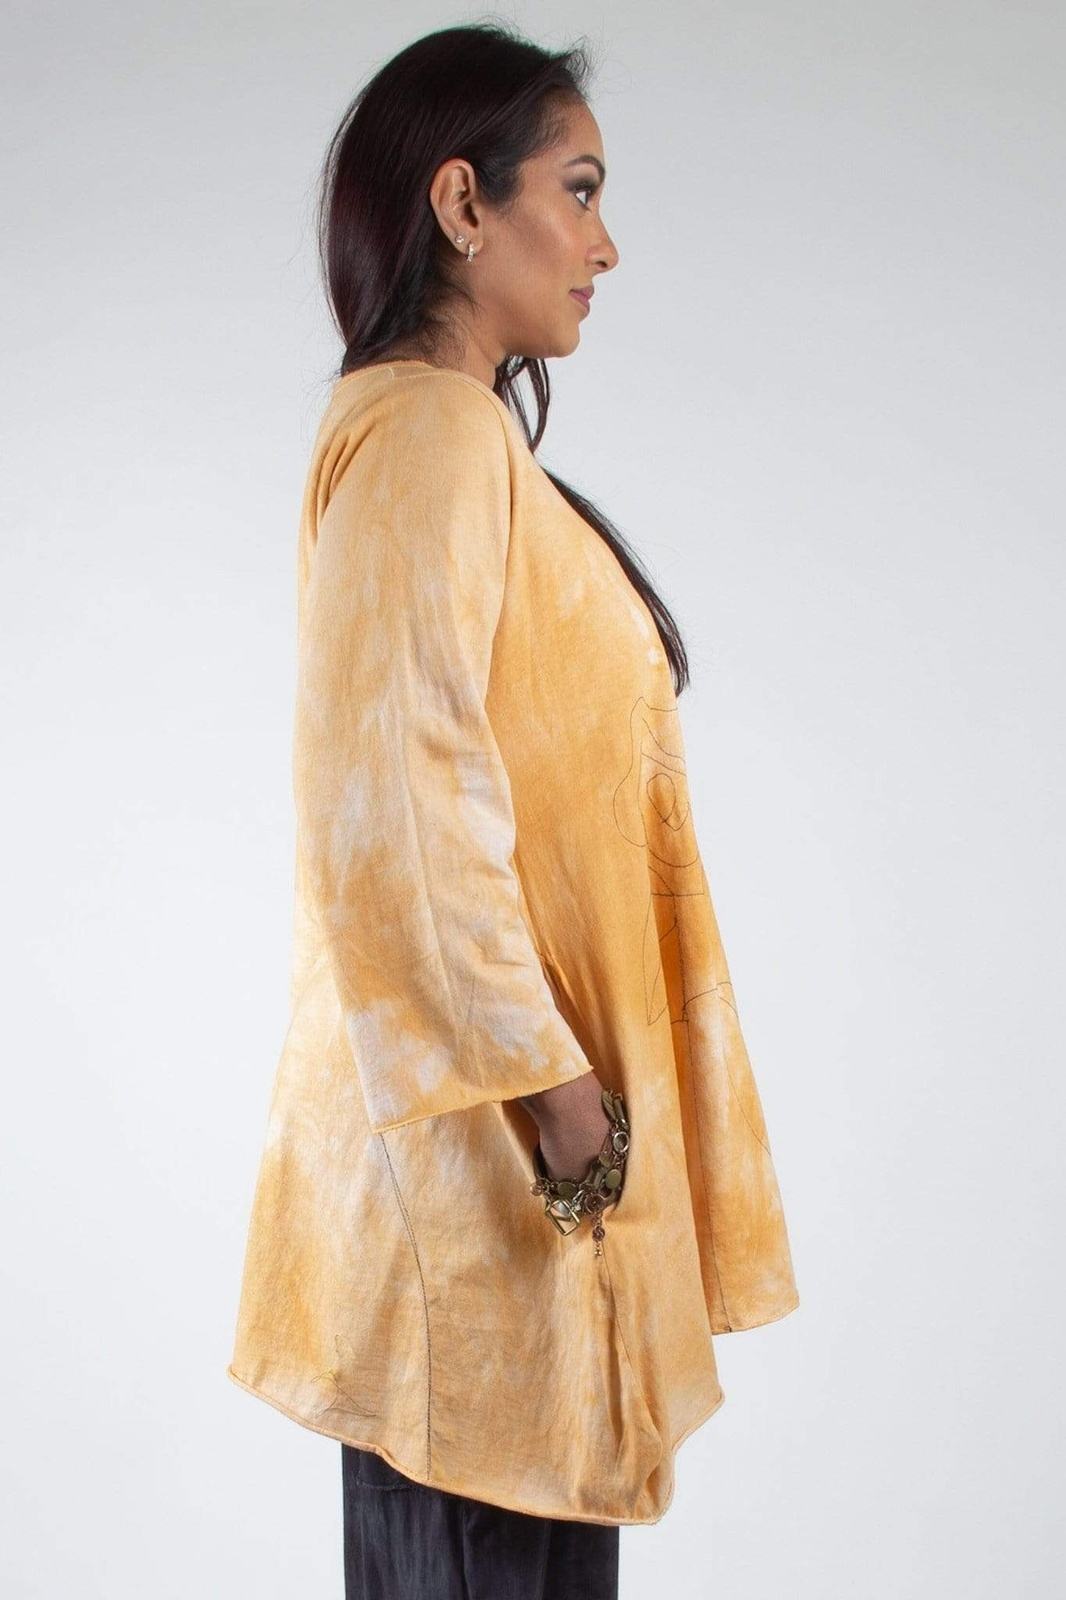 Genevieve Cotton Tunic with Embroidery on the Rack